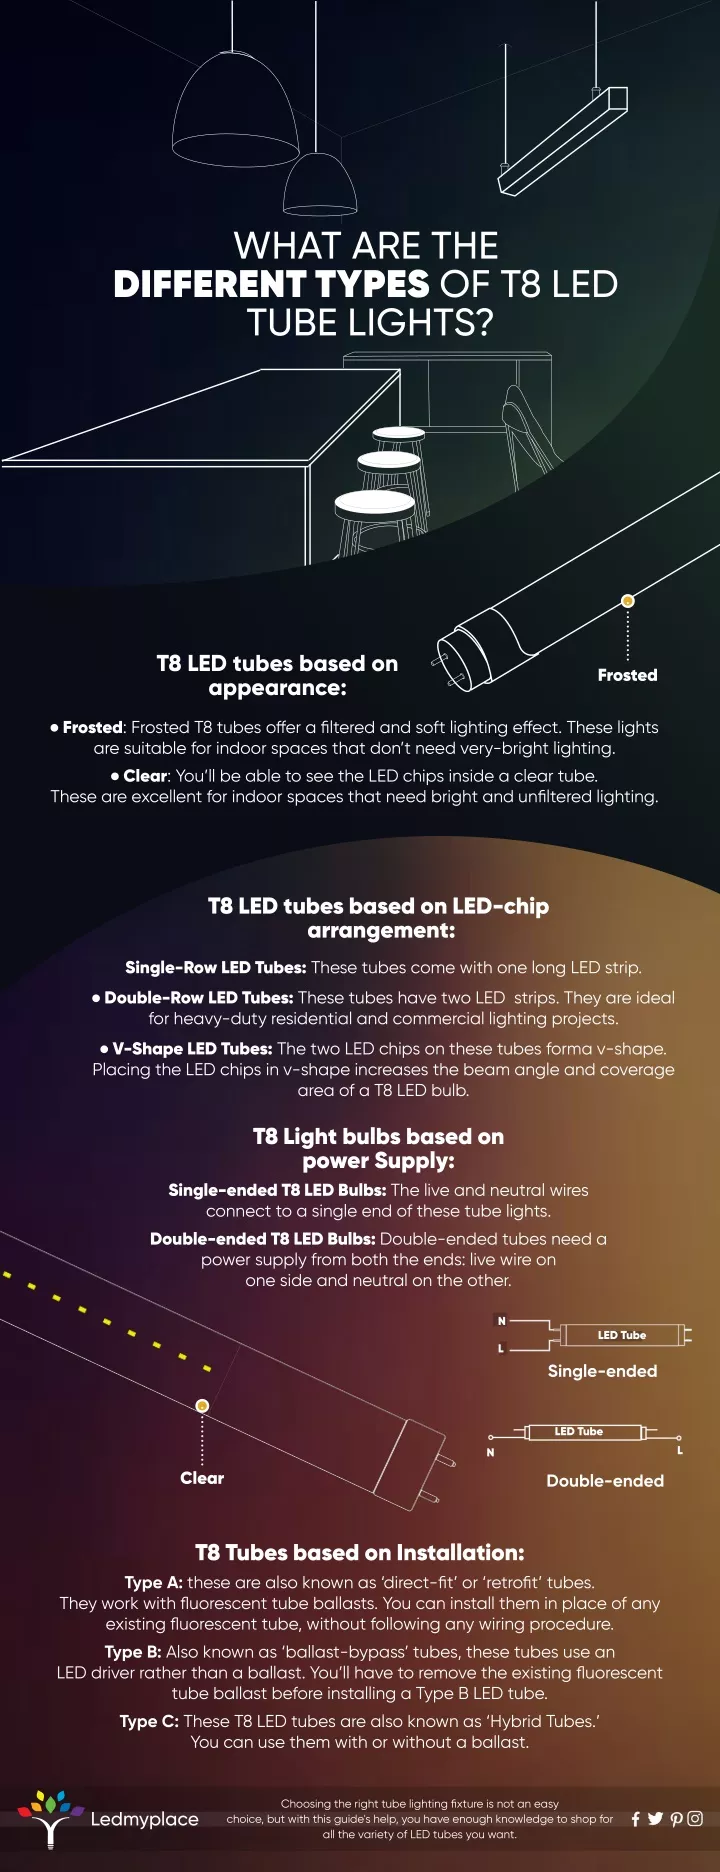 what are the different types of t8 led tube lights